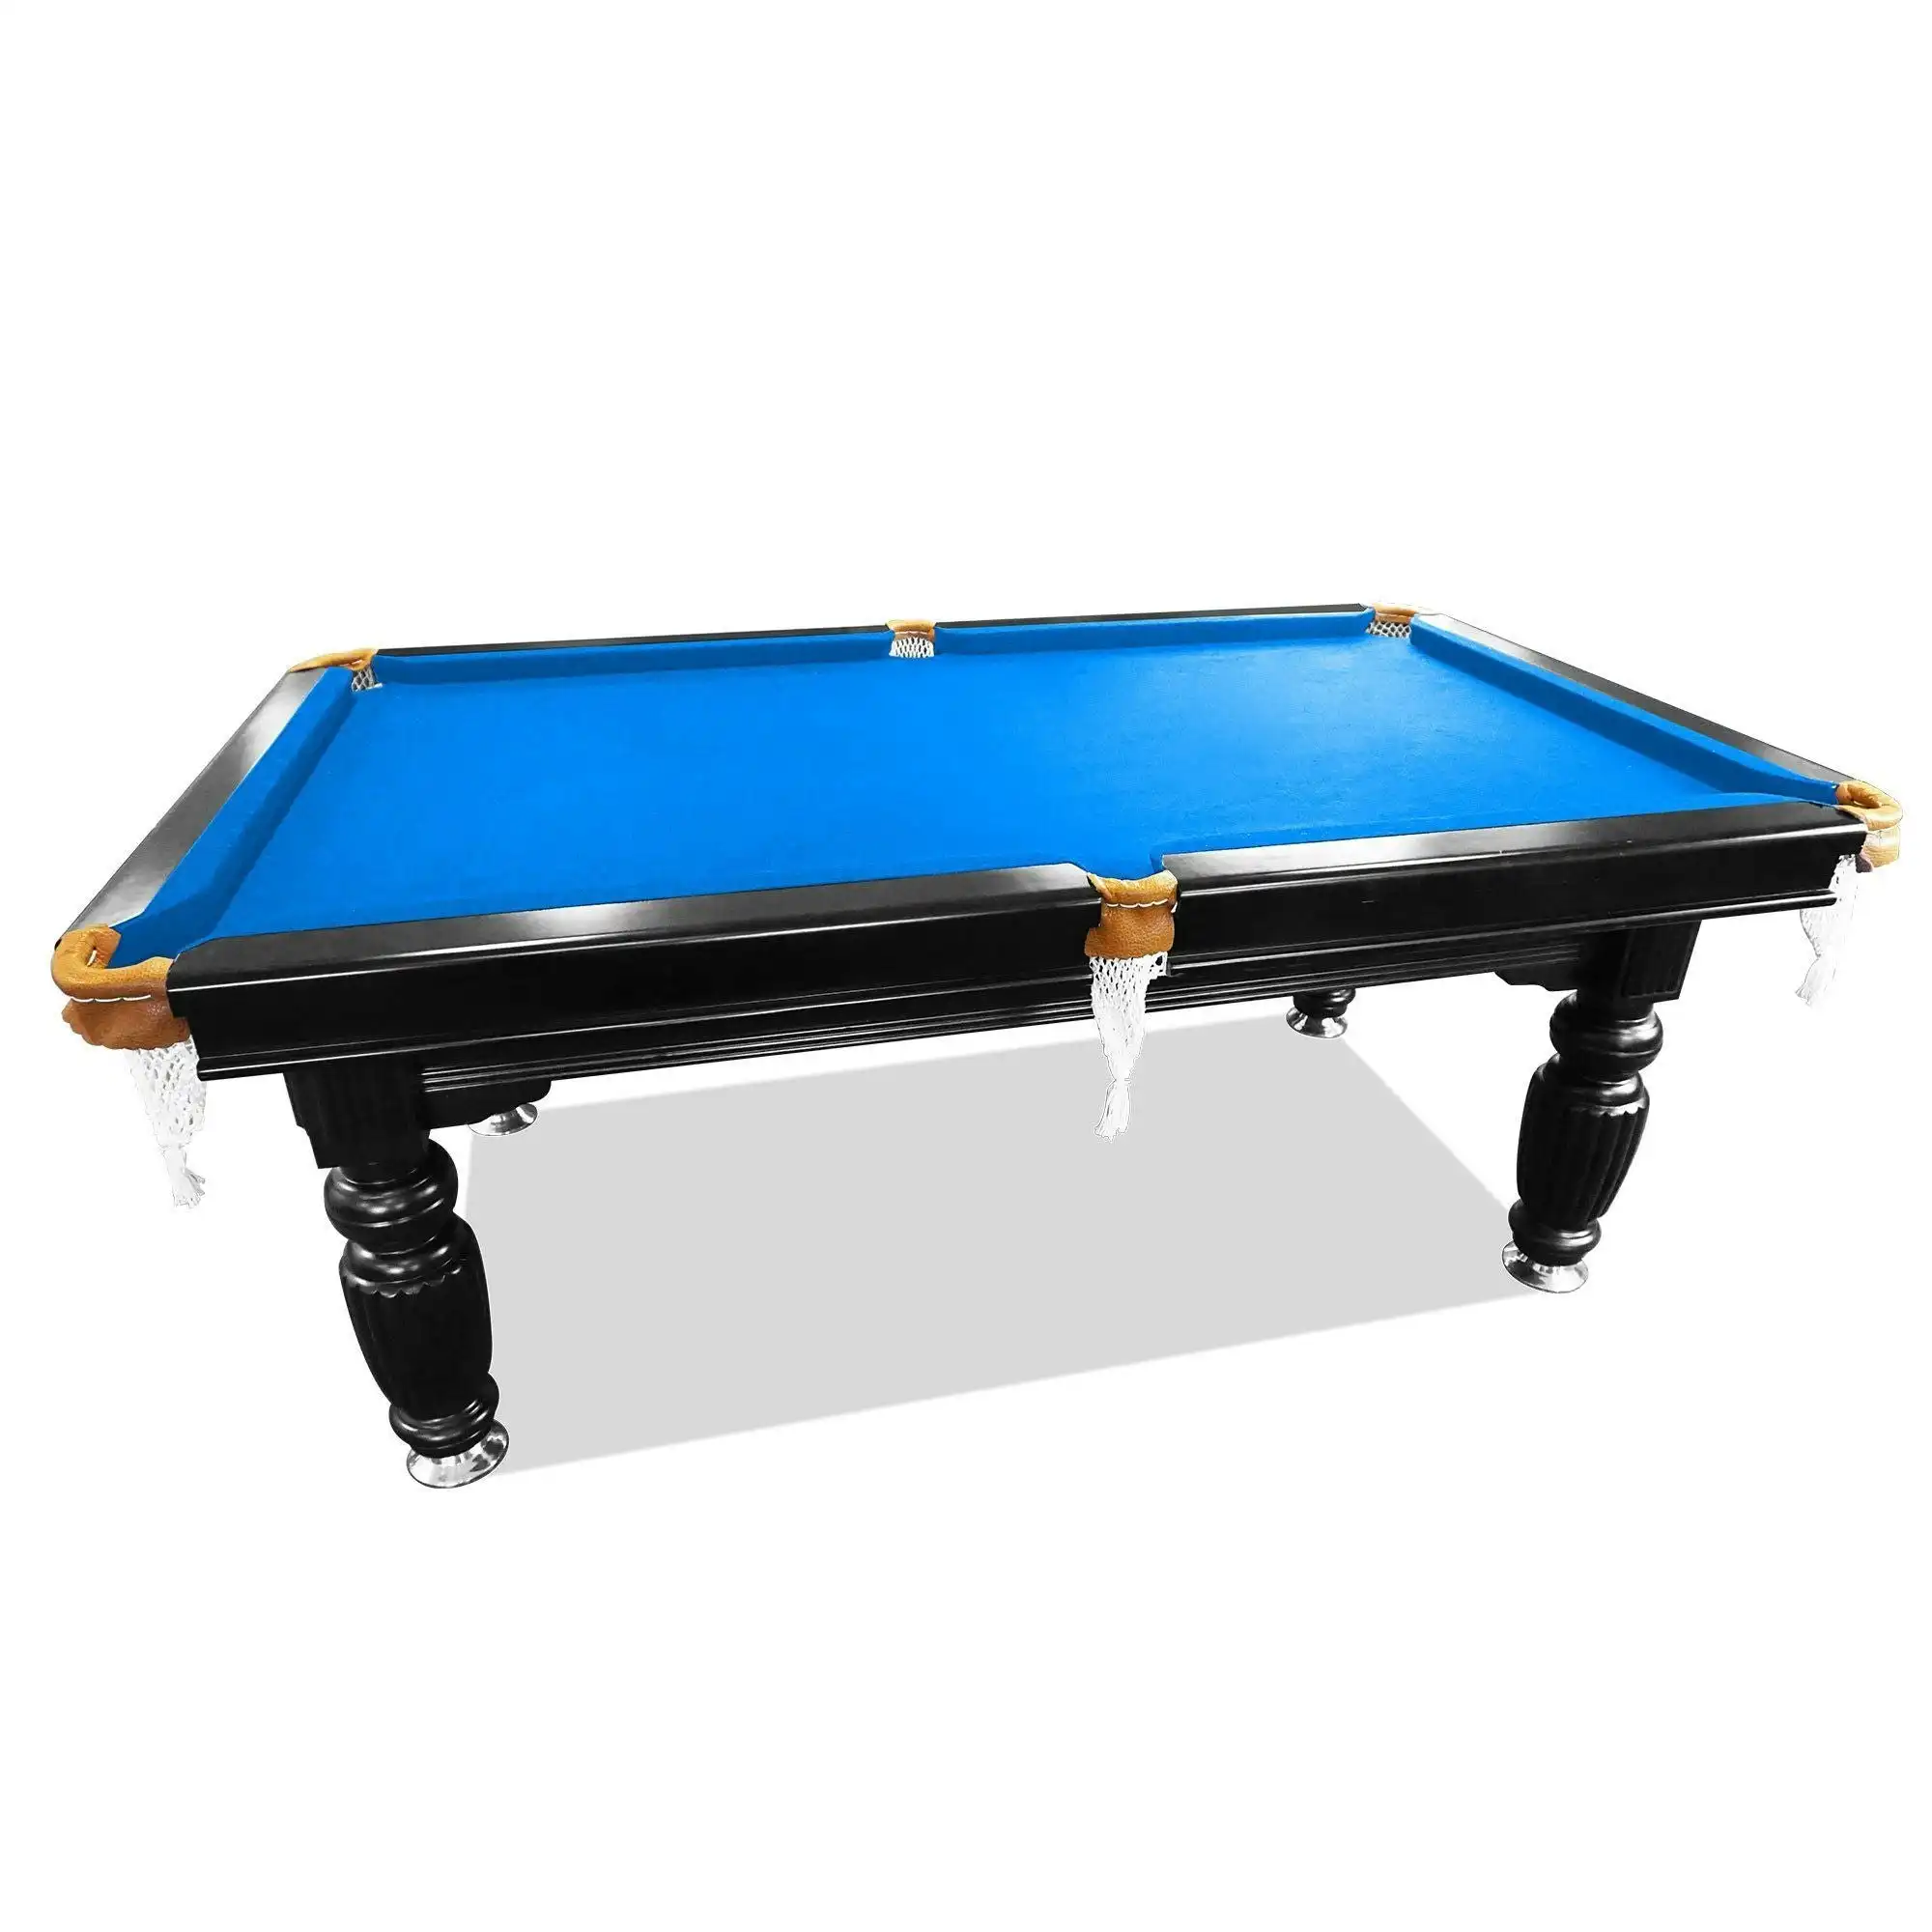 MACE 7FT Luxury Slate Pool Table Solid Timber Billiard Table Professional Snooker Game Table with Accessories Pack,Black Frame